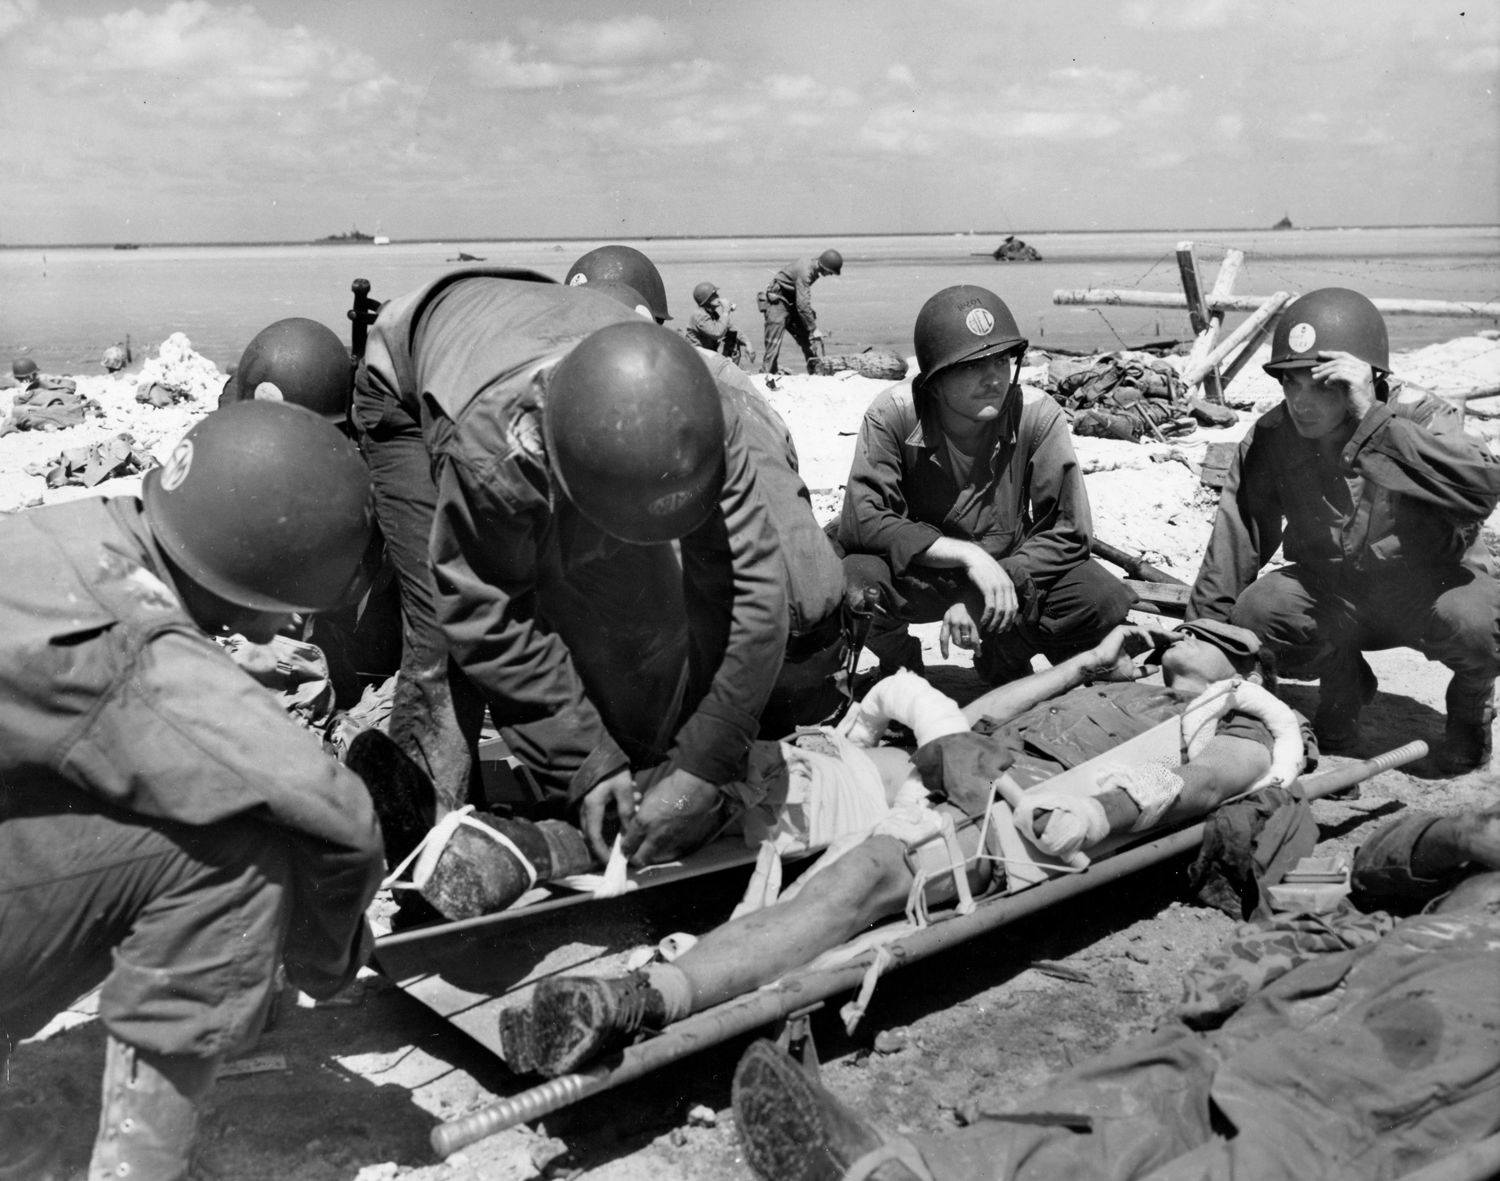 Overworked Navy corpsmen, always the unsung heroes, were credited with saving many lives during the battle. 